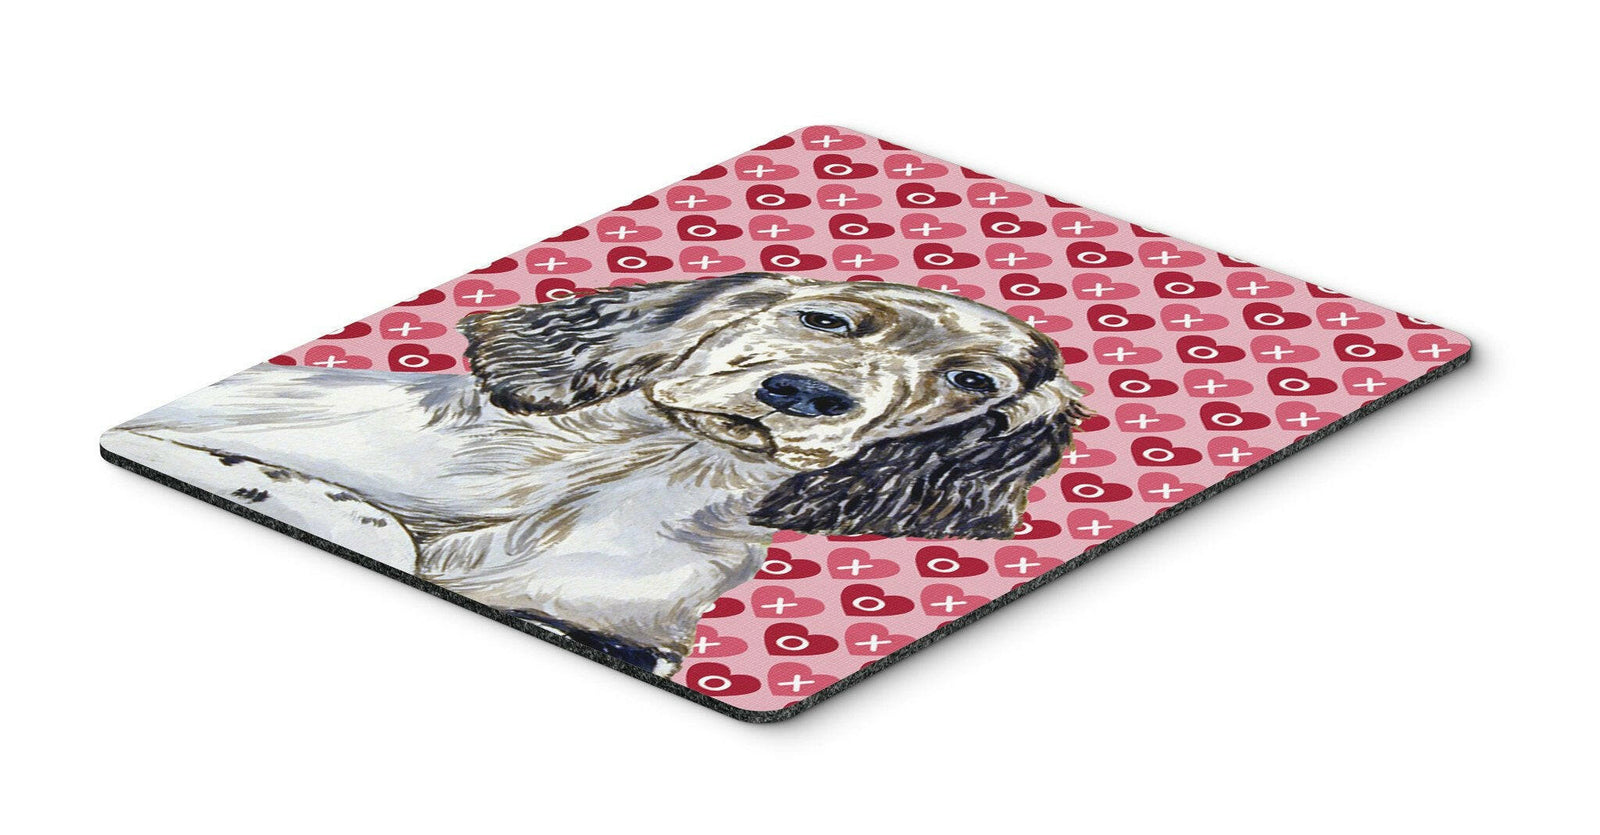 English Setter Hearts Love and Valentine's Day Mouse Pad, Hot Pad or Trivet by Caroline's Treasures